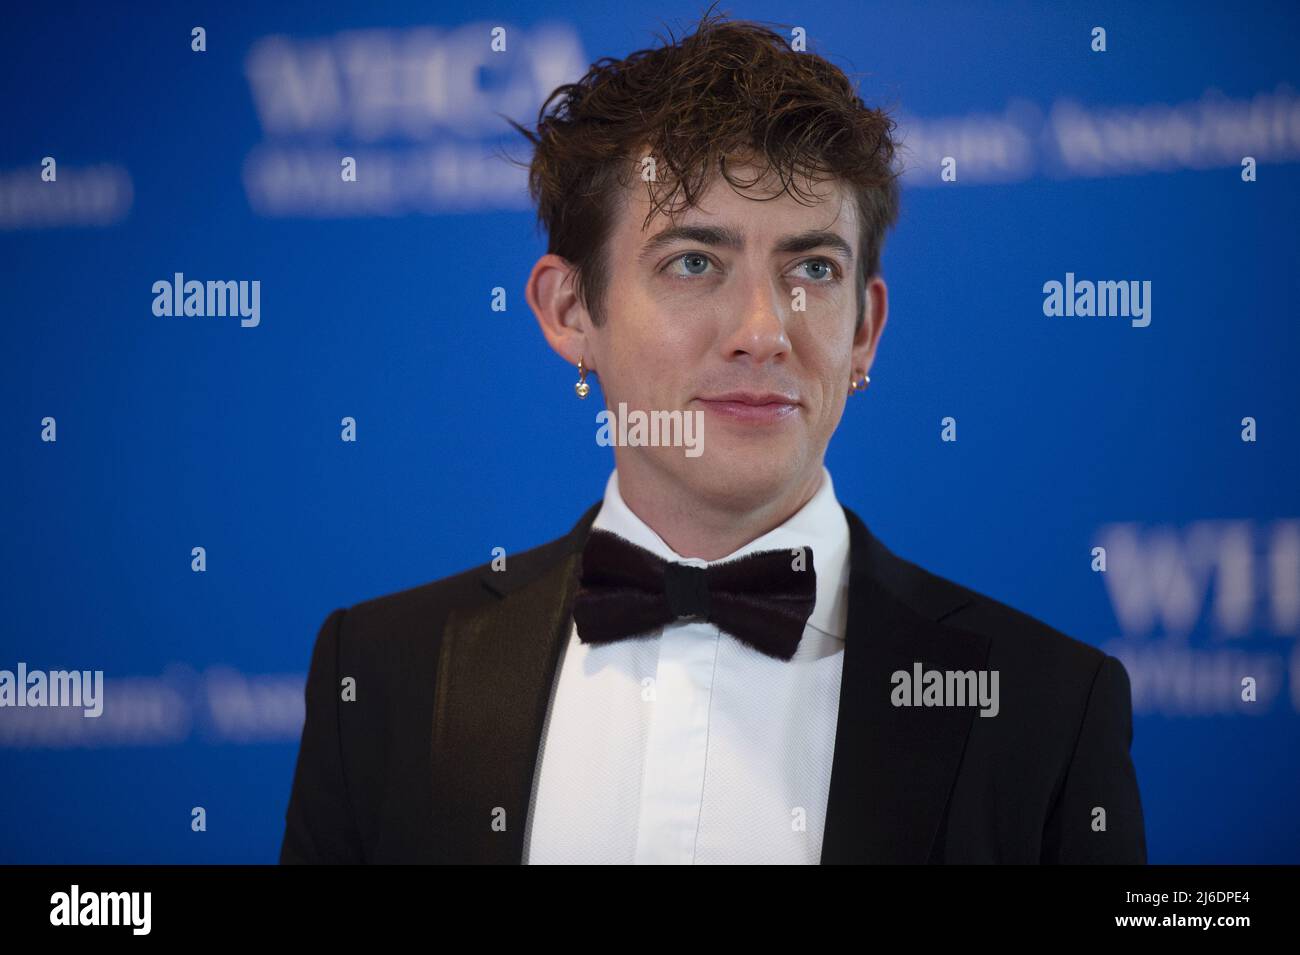 Actor Kevin McHale arrives at the 2022 White House Correspondents' Association Dinner at the Washington Hilton in Washington, DC on Saturday, April 30, 2022. The dinner is back this year for the first time since 2019. Photo by Bonnie Cash/UPI.... . Stock Photo